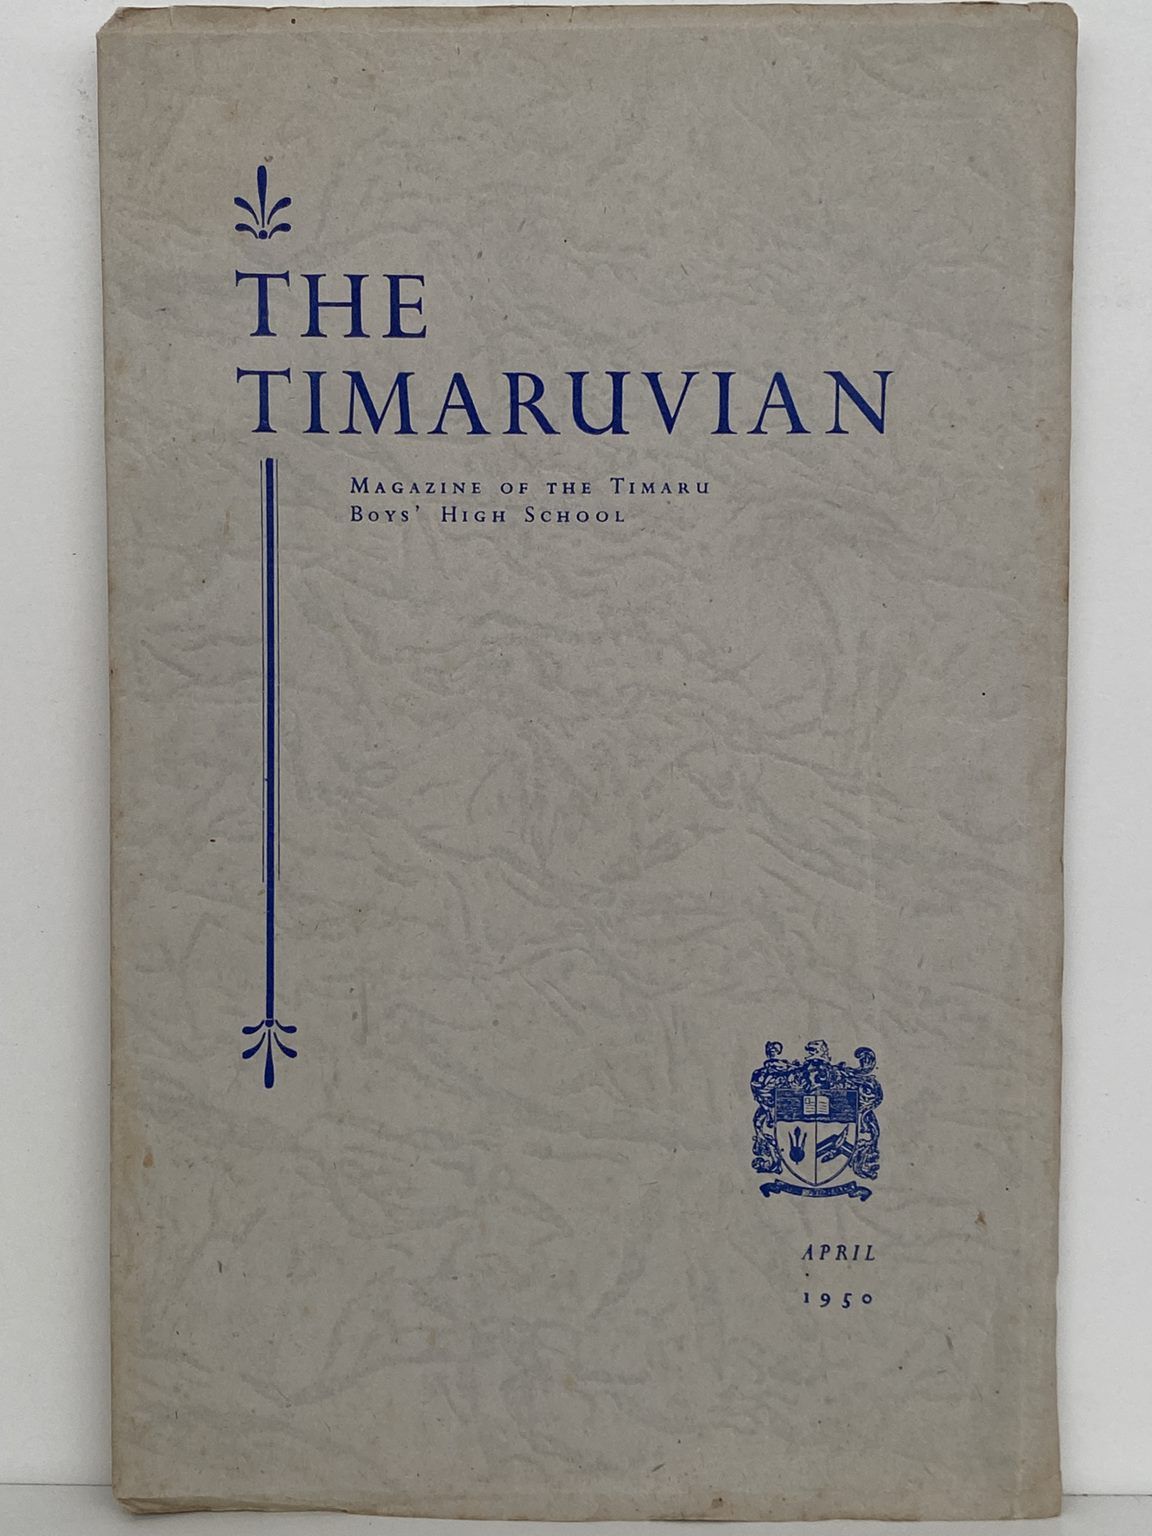 THE TIMARUVIAN: Magazine of the Timaru Boys' High School and its Old Boys' Association 1950